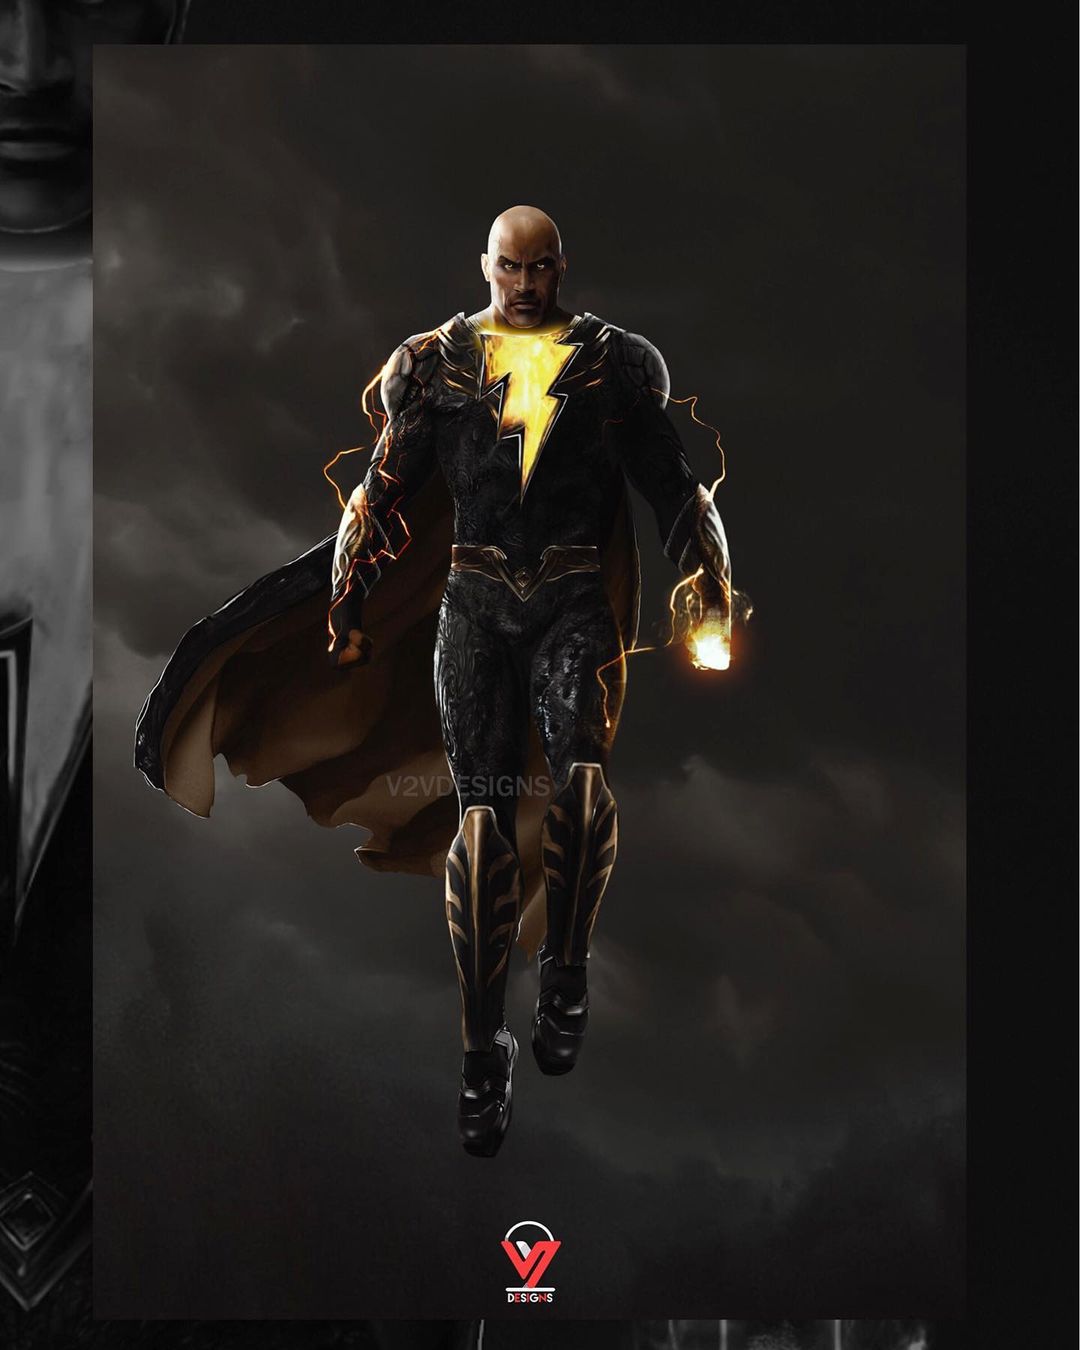 Fan Art]DC's Black Adam(2022) in the style of Marvel Studios' Thor (2011).  A fun poster swap experiment. : r/DCcomics